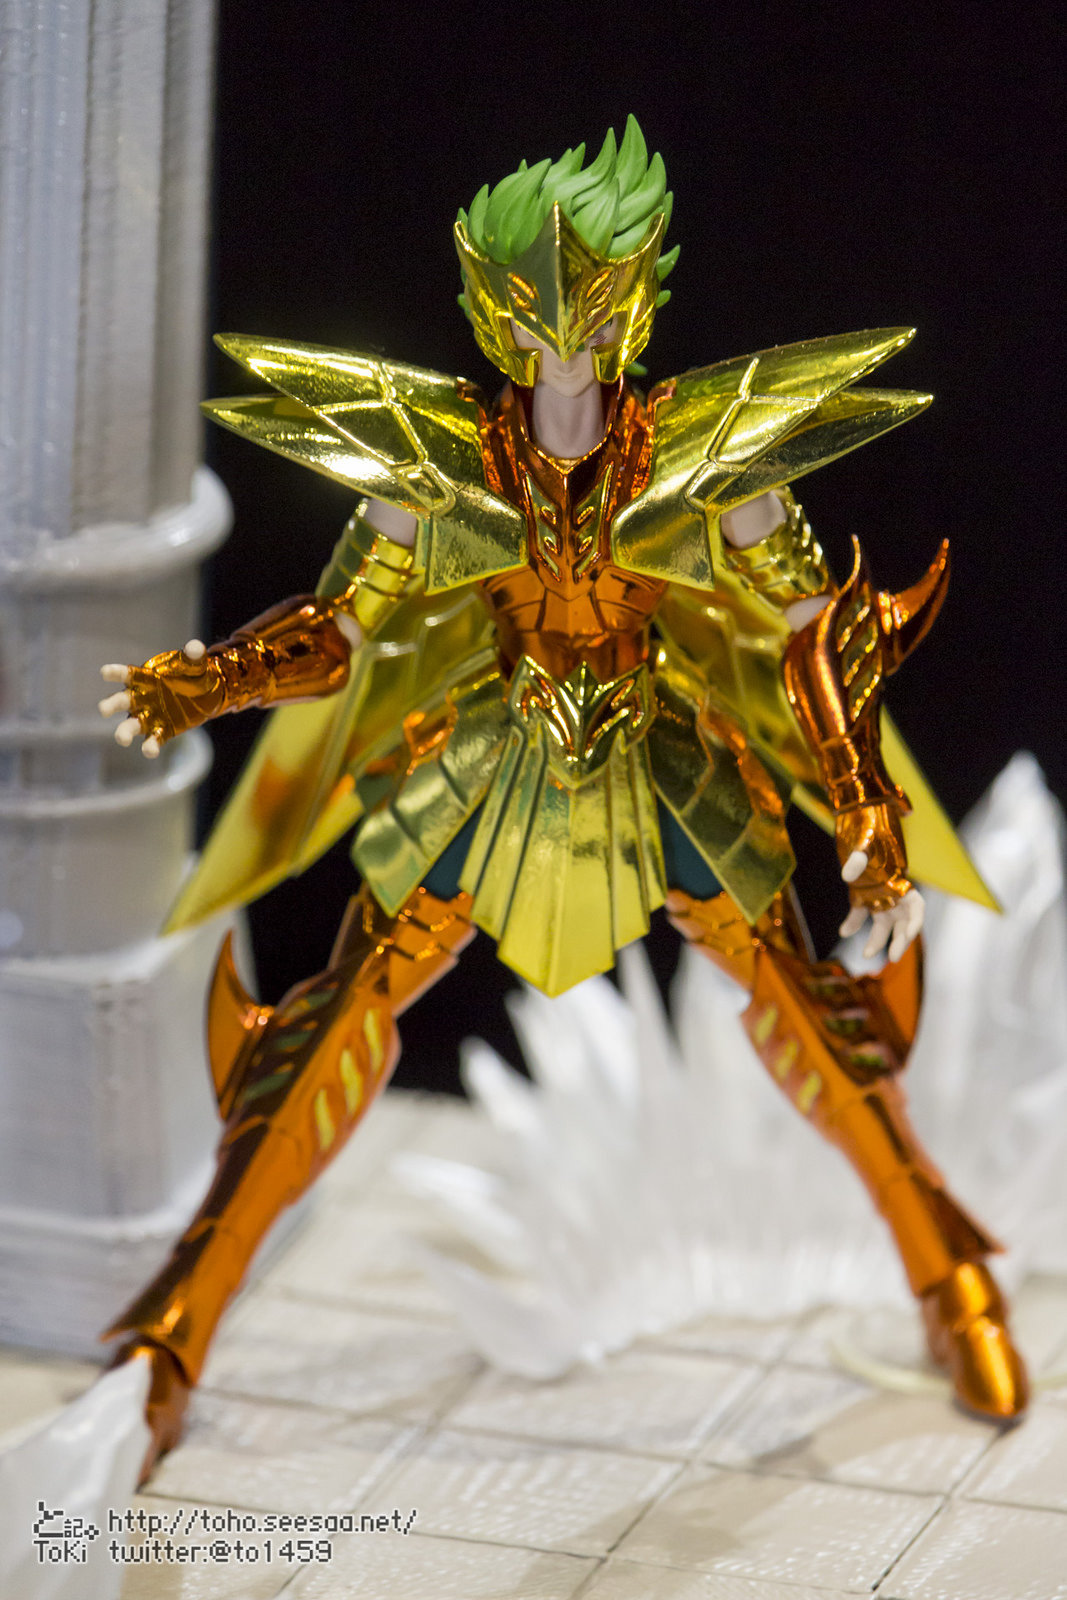 Exposition "Complete Works Of saint Seiya, 30th Anniversary" (18 au 29 Juin 2016) - Page 6 3n5w